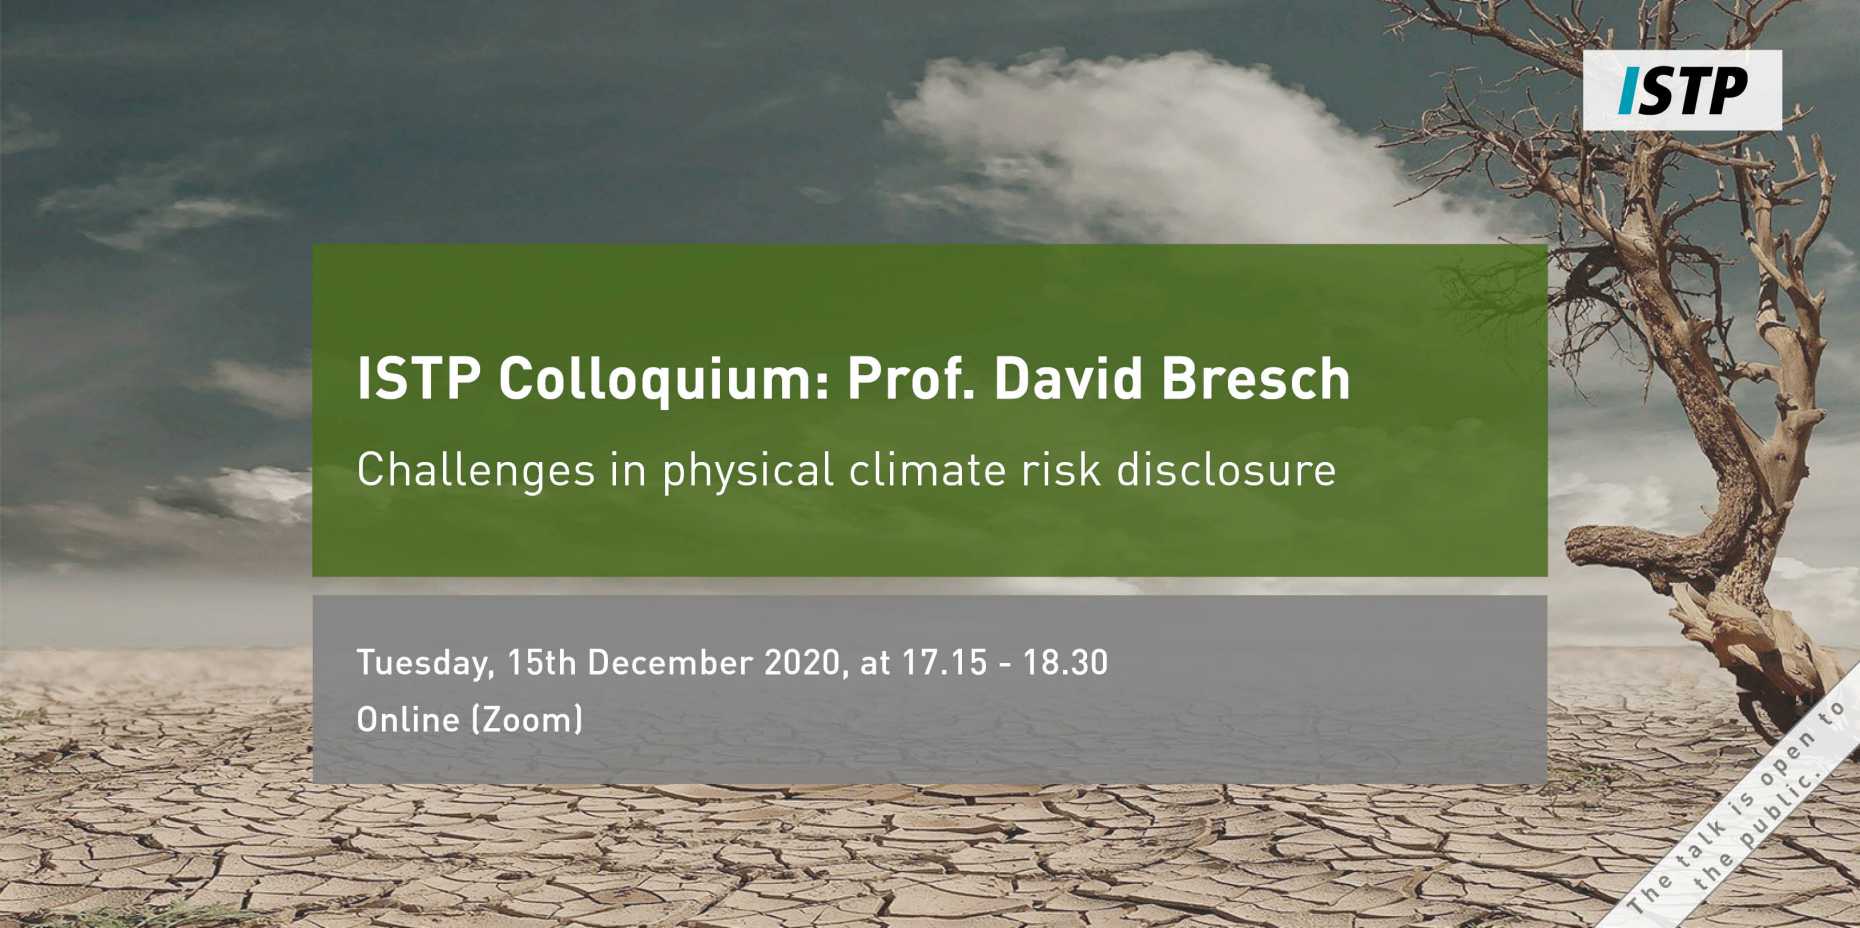 ISTP Colloquium: Challenges in physical climate risk disclosure